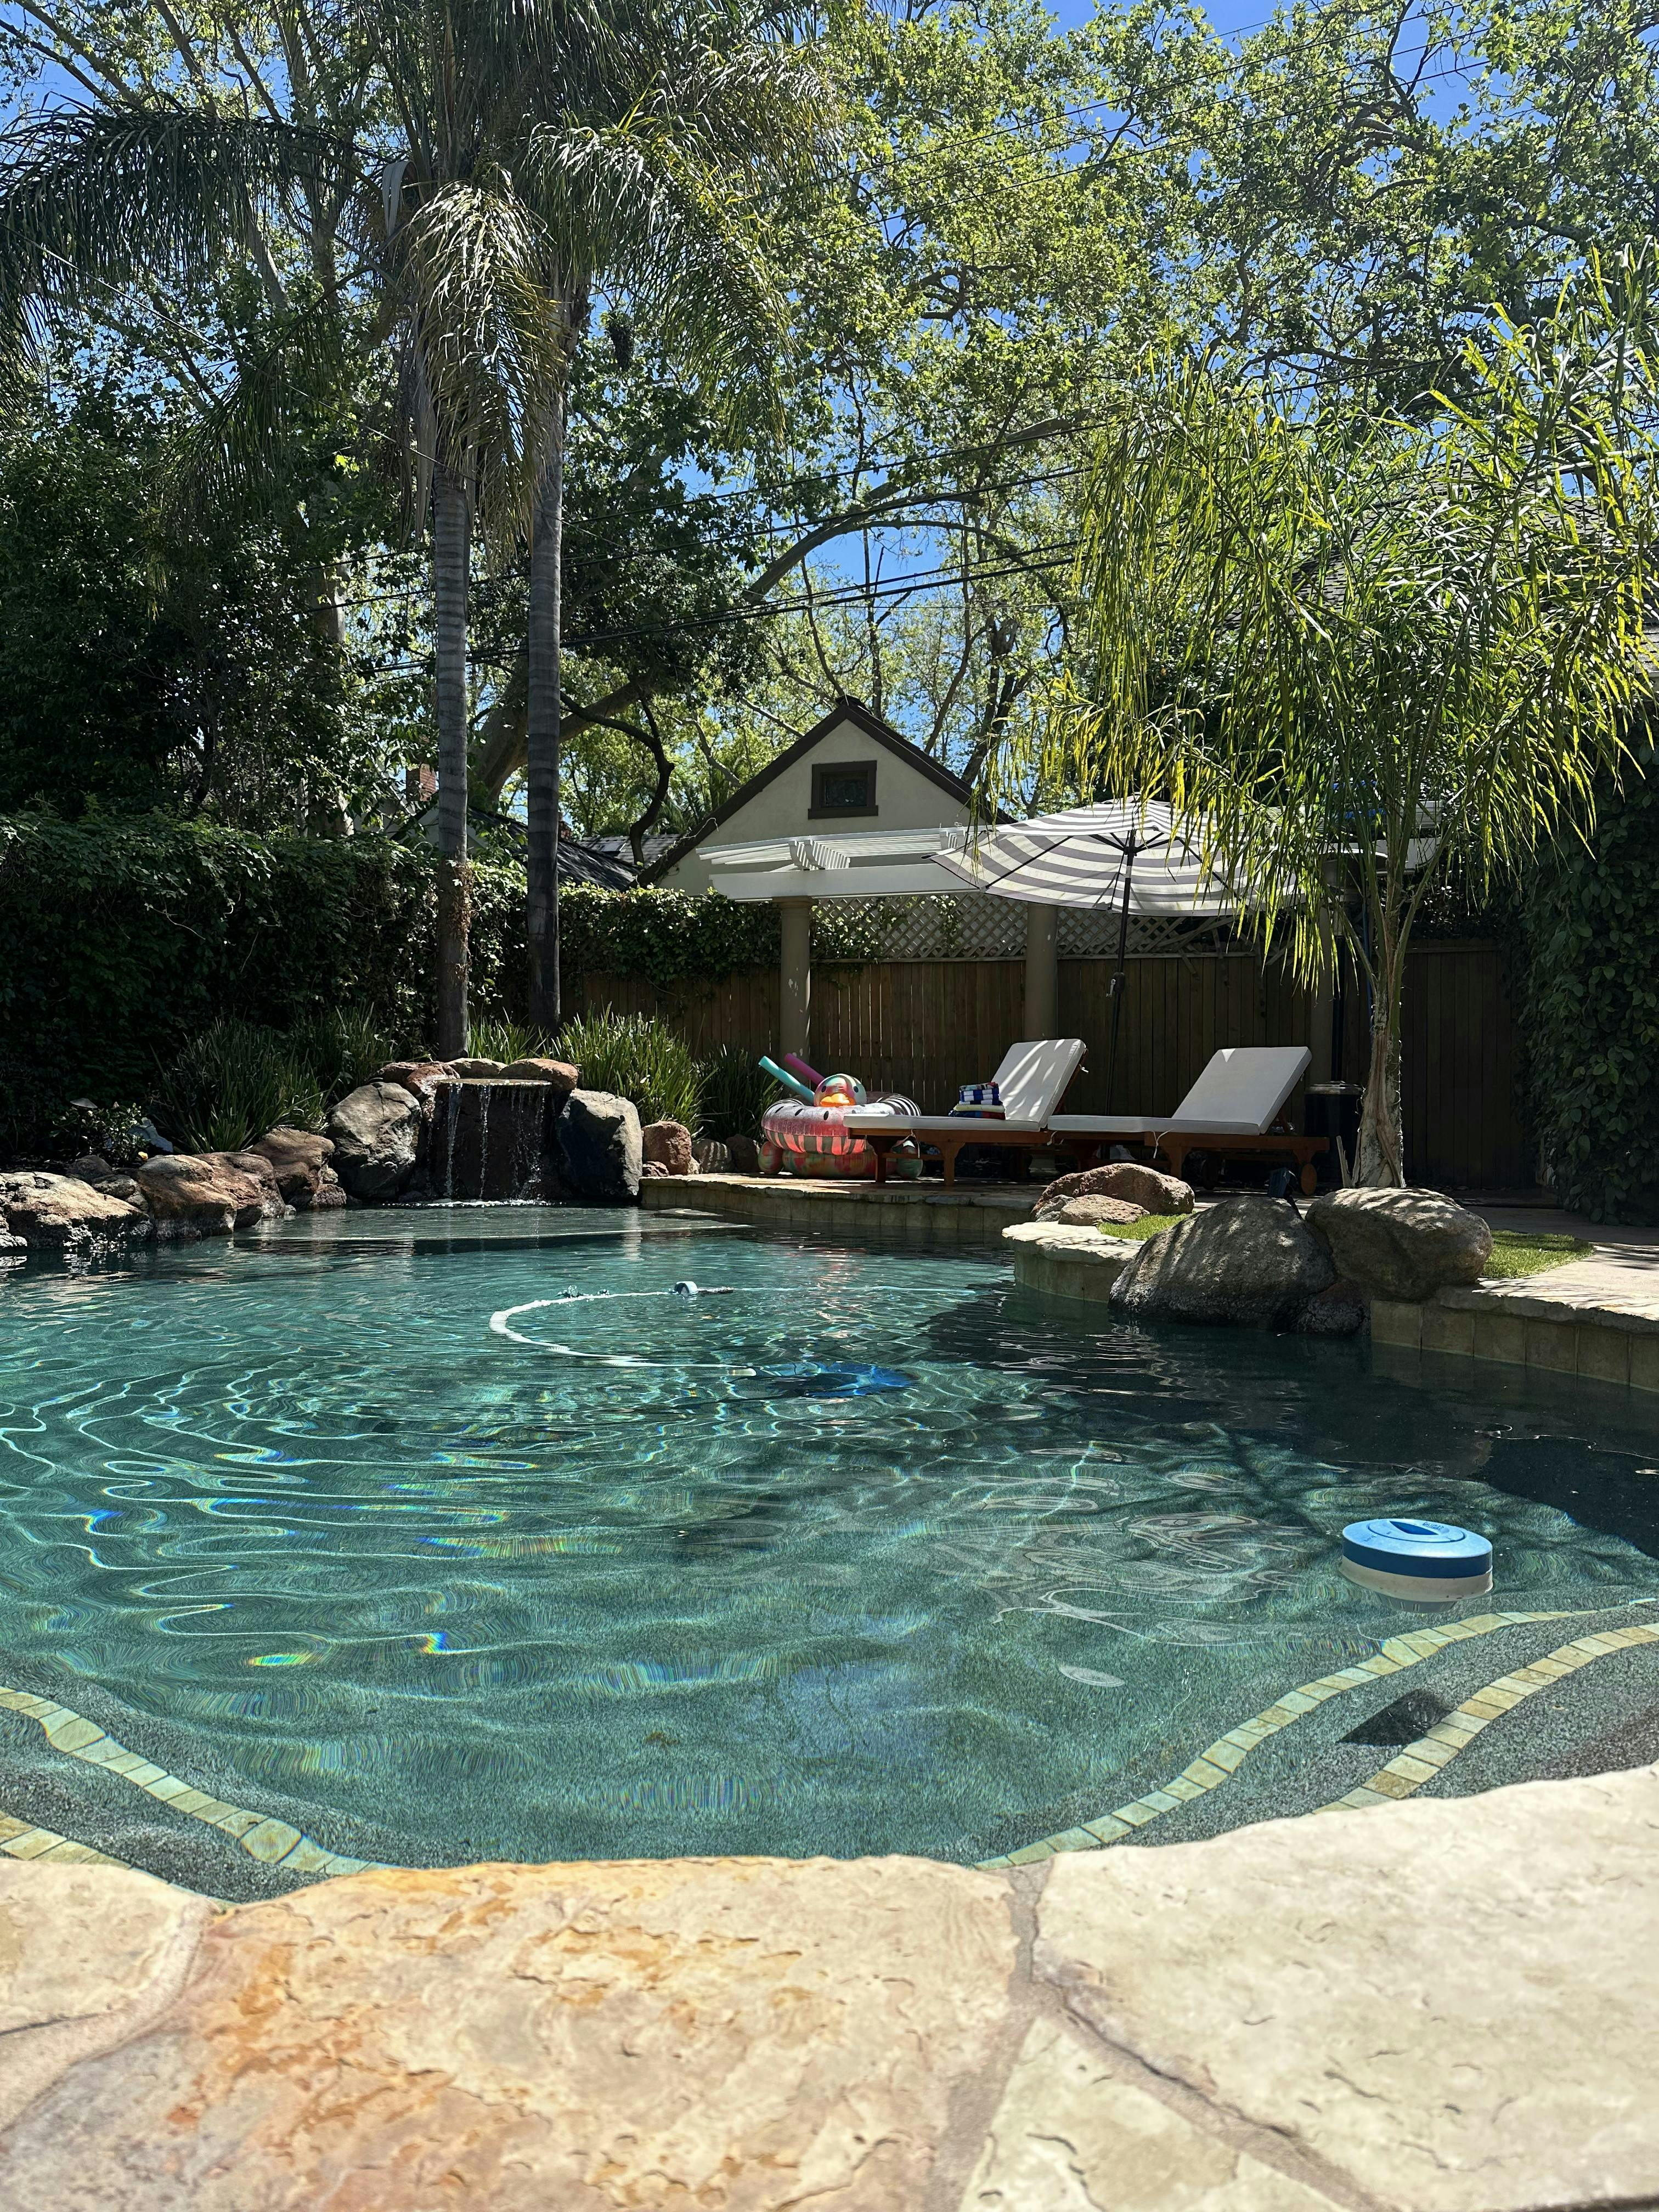 East Sac saltwater pool w/ outdoor kitchen and gameroom access